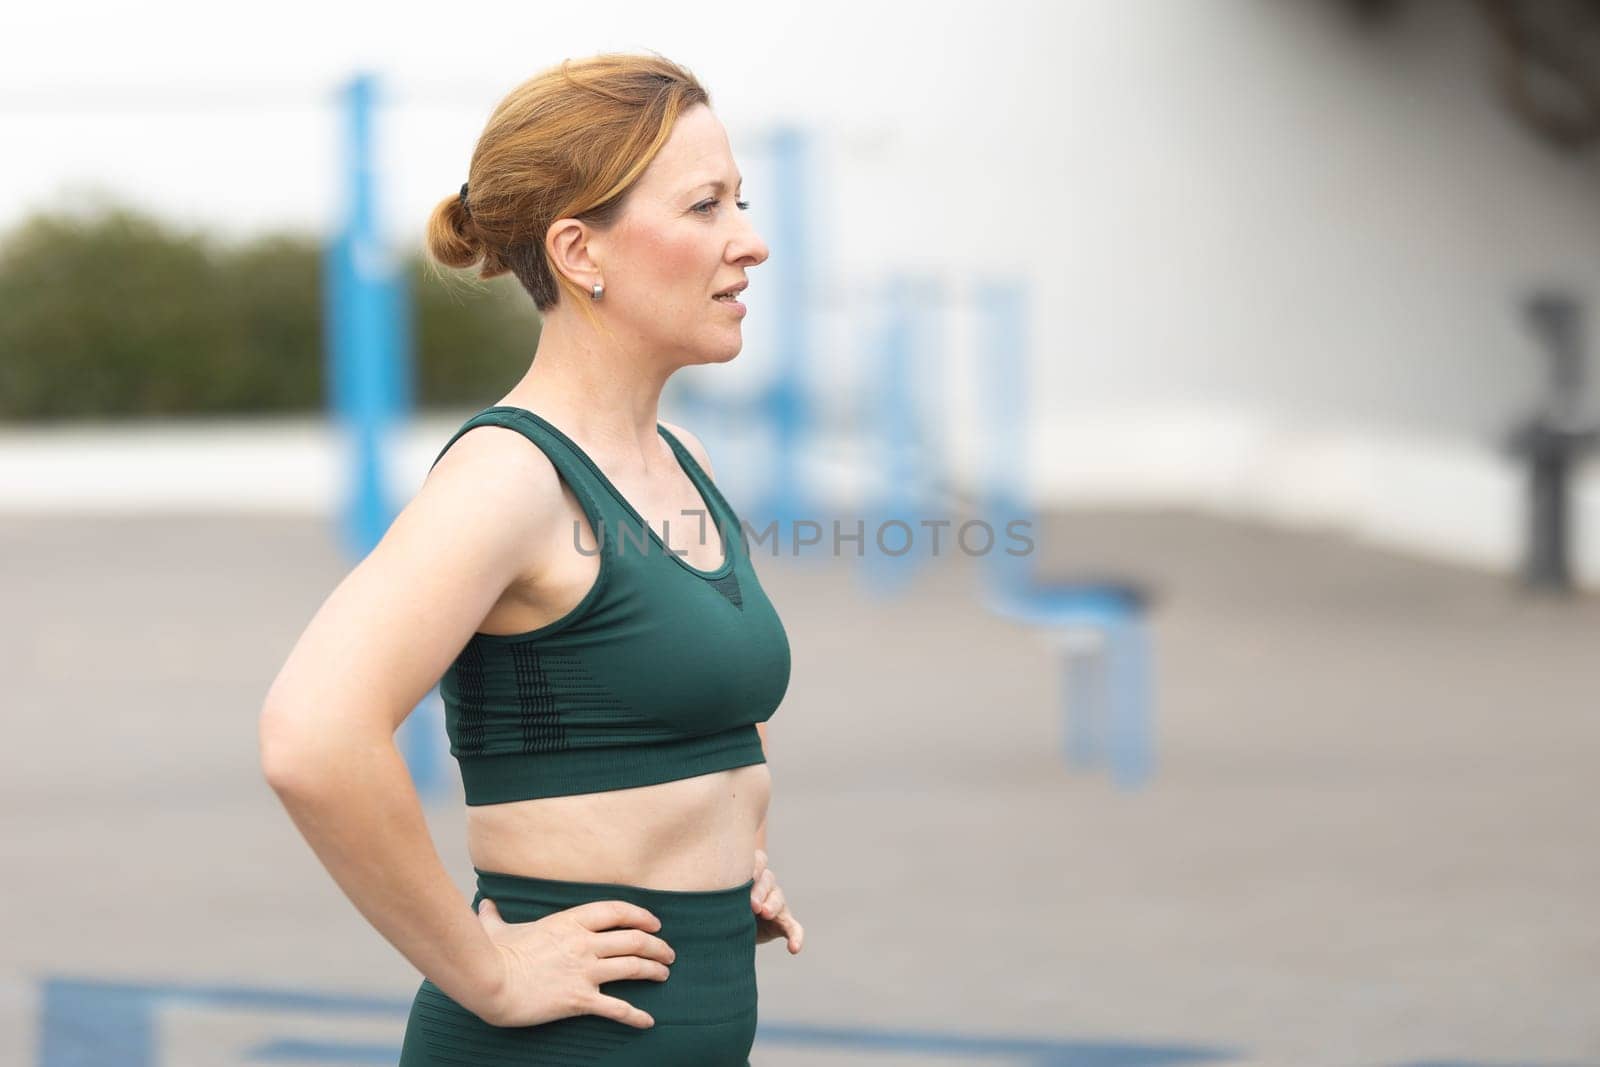 Adult sportive woman standing on the outdoors sports ground. Mid shot